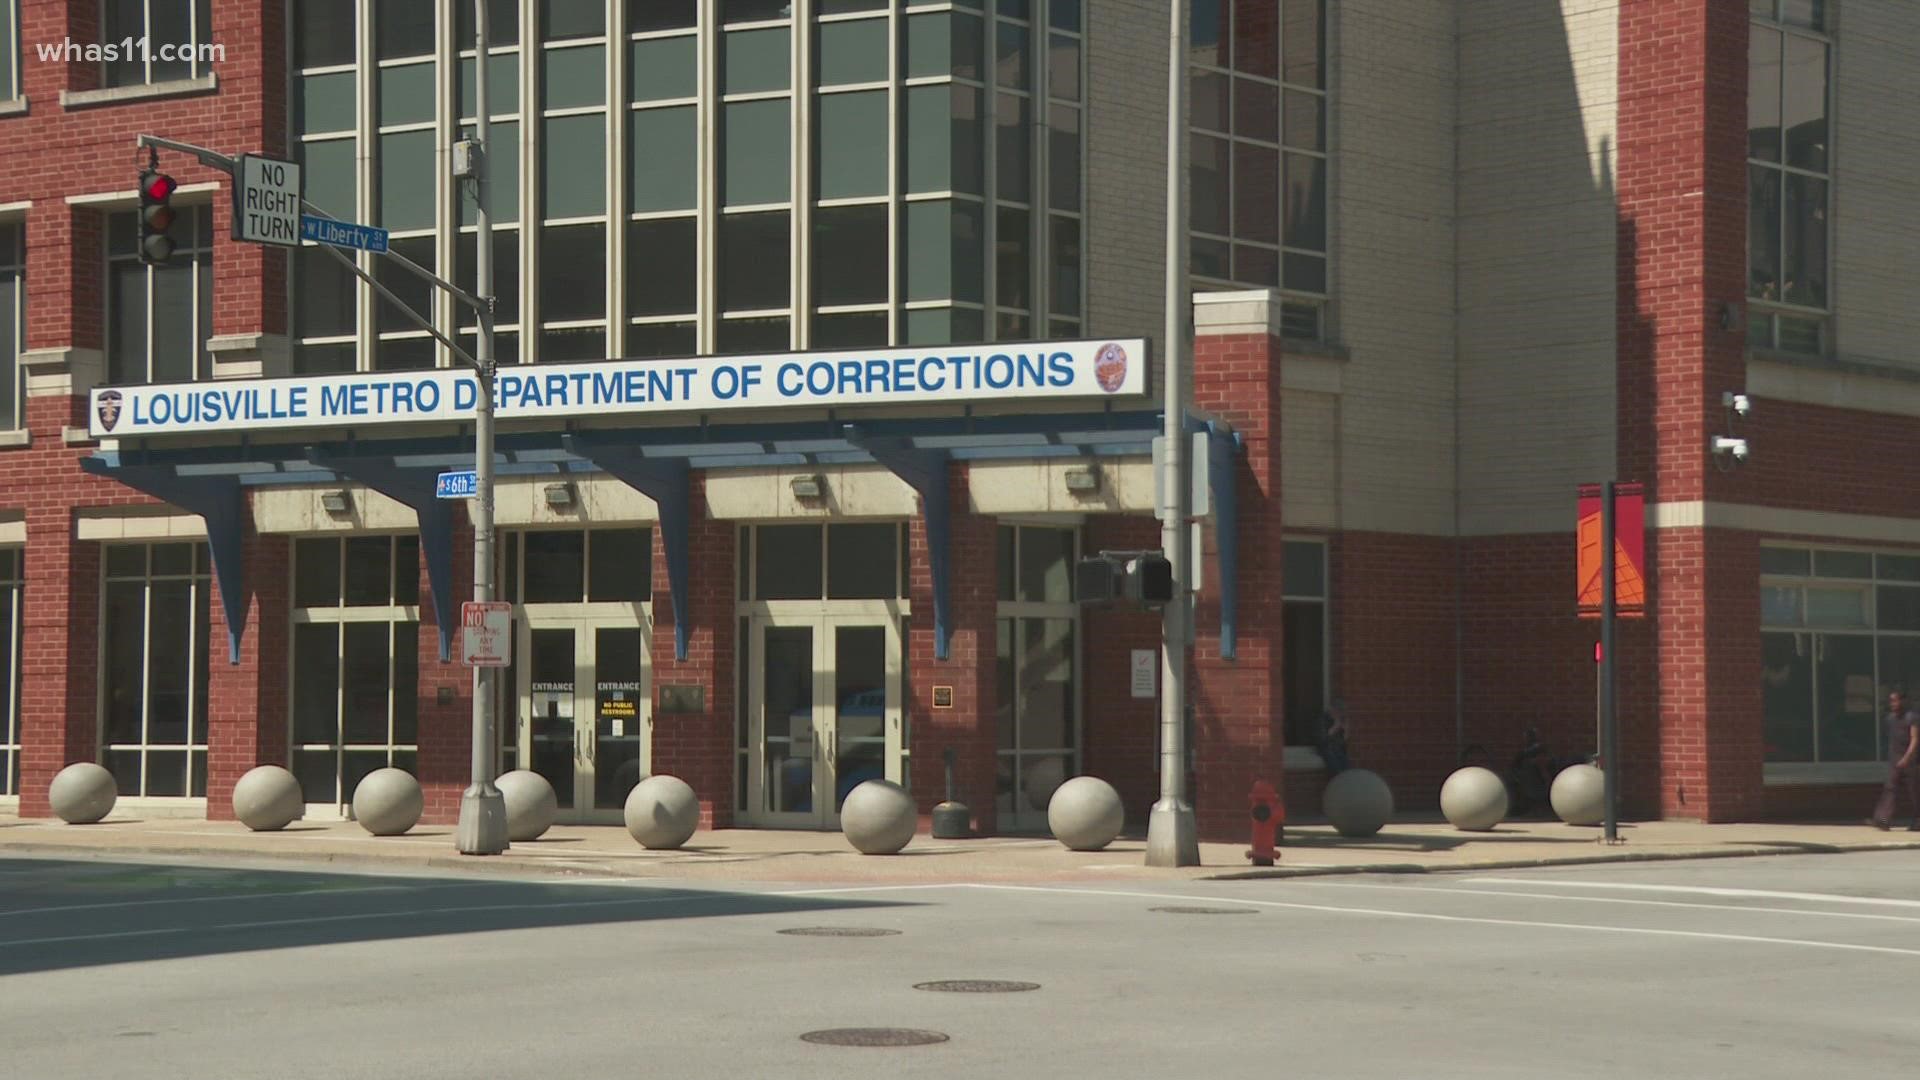 Metro Corrections Director Jerry Collins said two people were arrested on drug-related charges. It is unclear if the two arrests are related at this time he said.